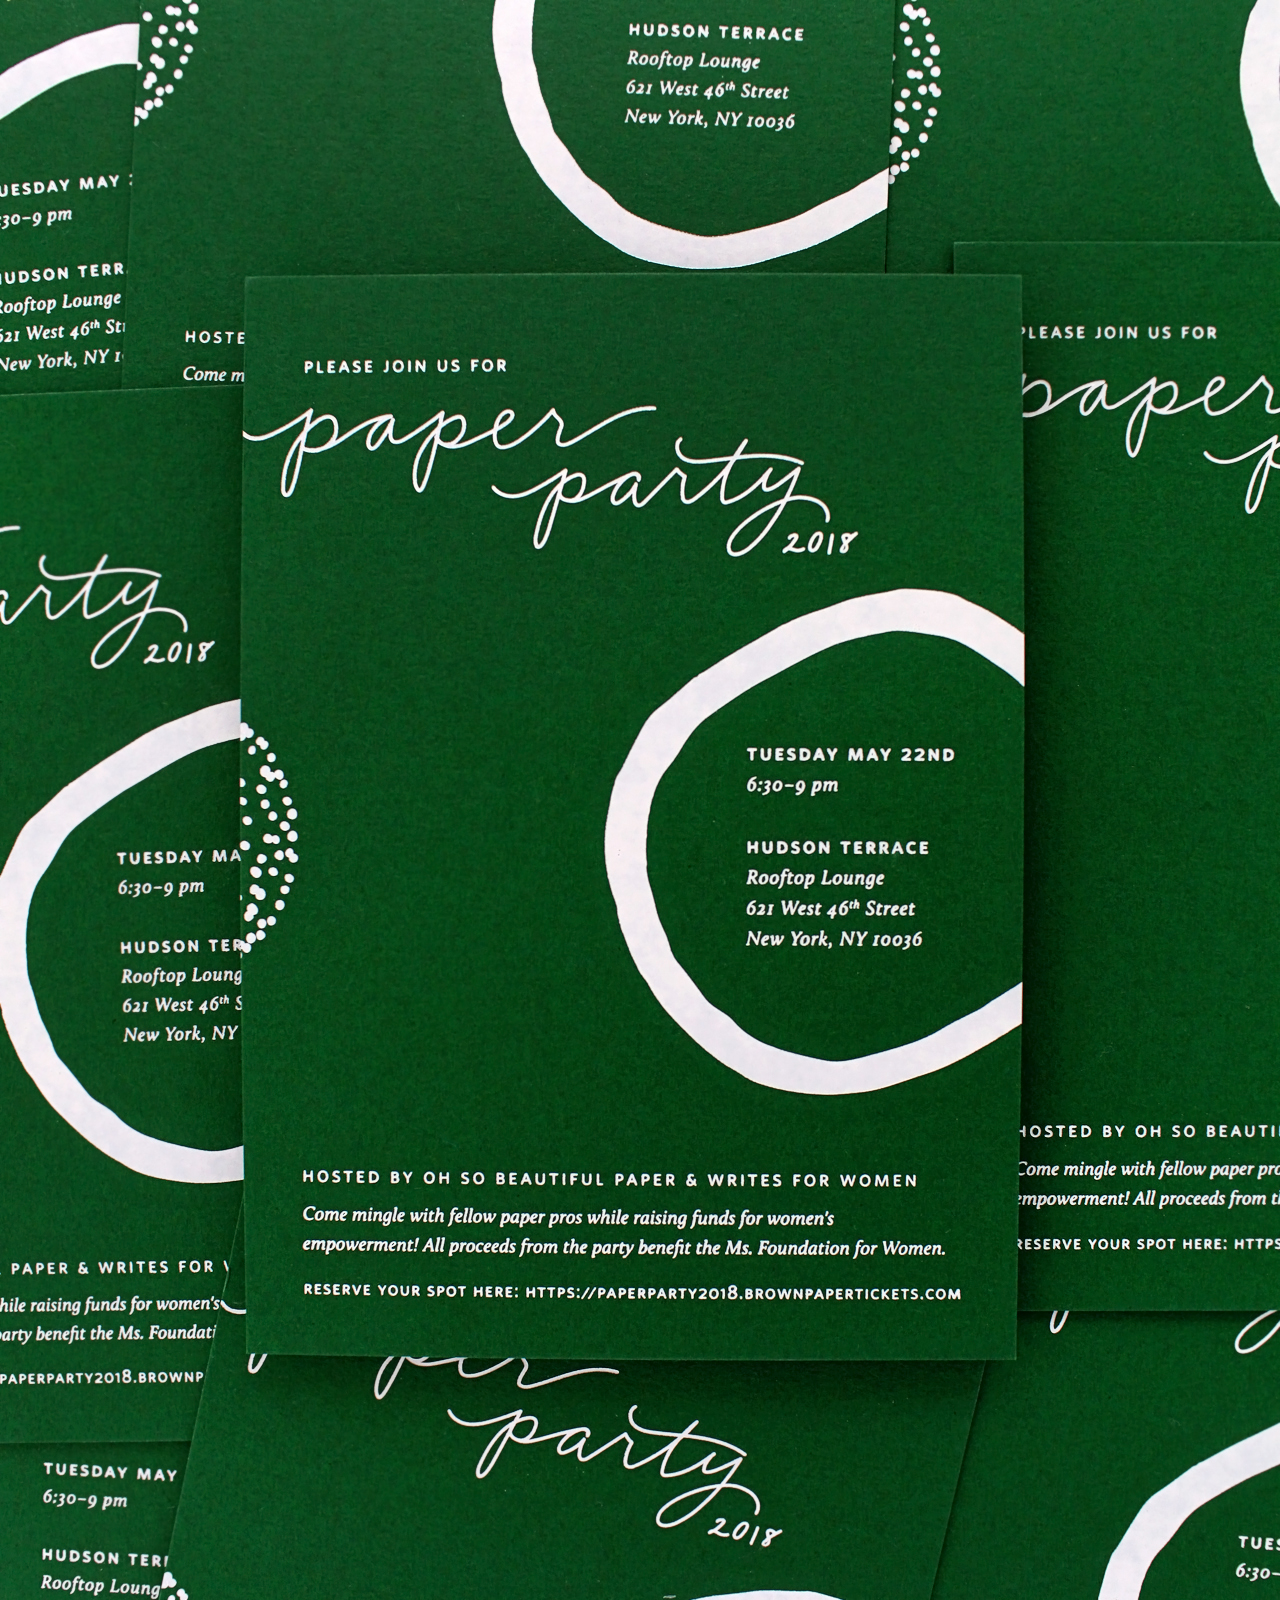 Paper Party 2018 Modern Minimalist Invitations with Abstract Shapes / Design by Ramona & Ruth / Printed by Bella Figura on Legion Paper Colorplan Forest Green